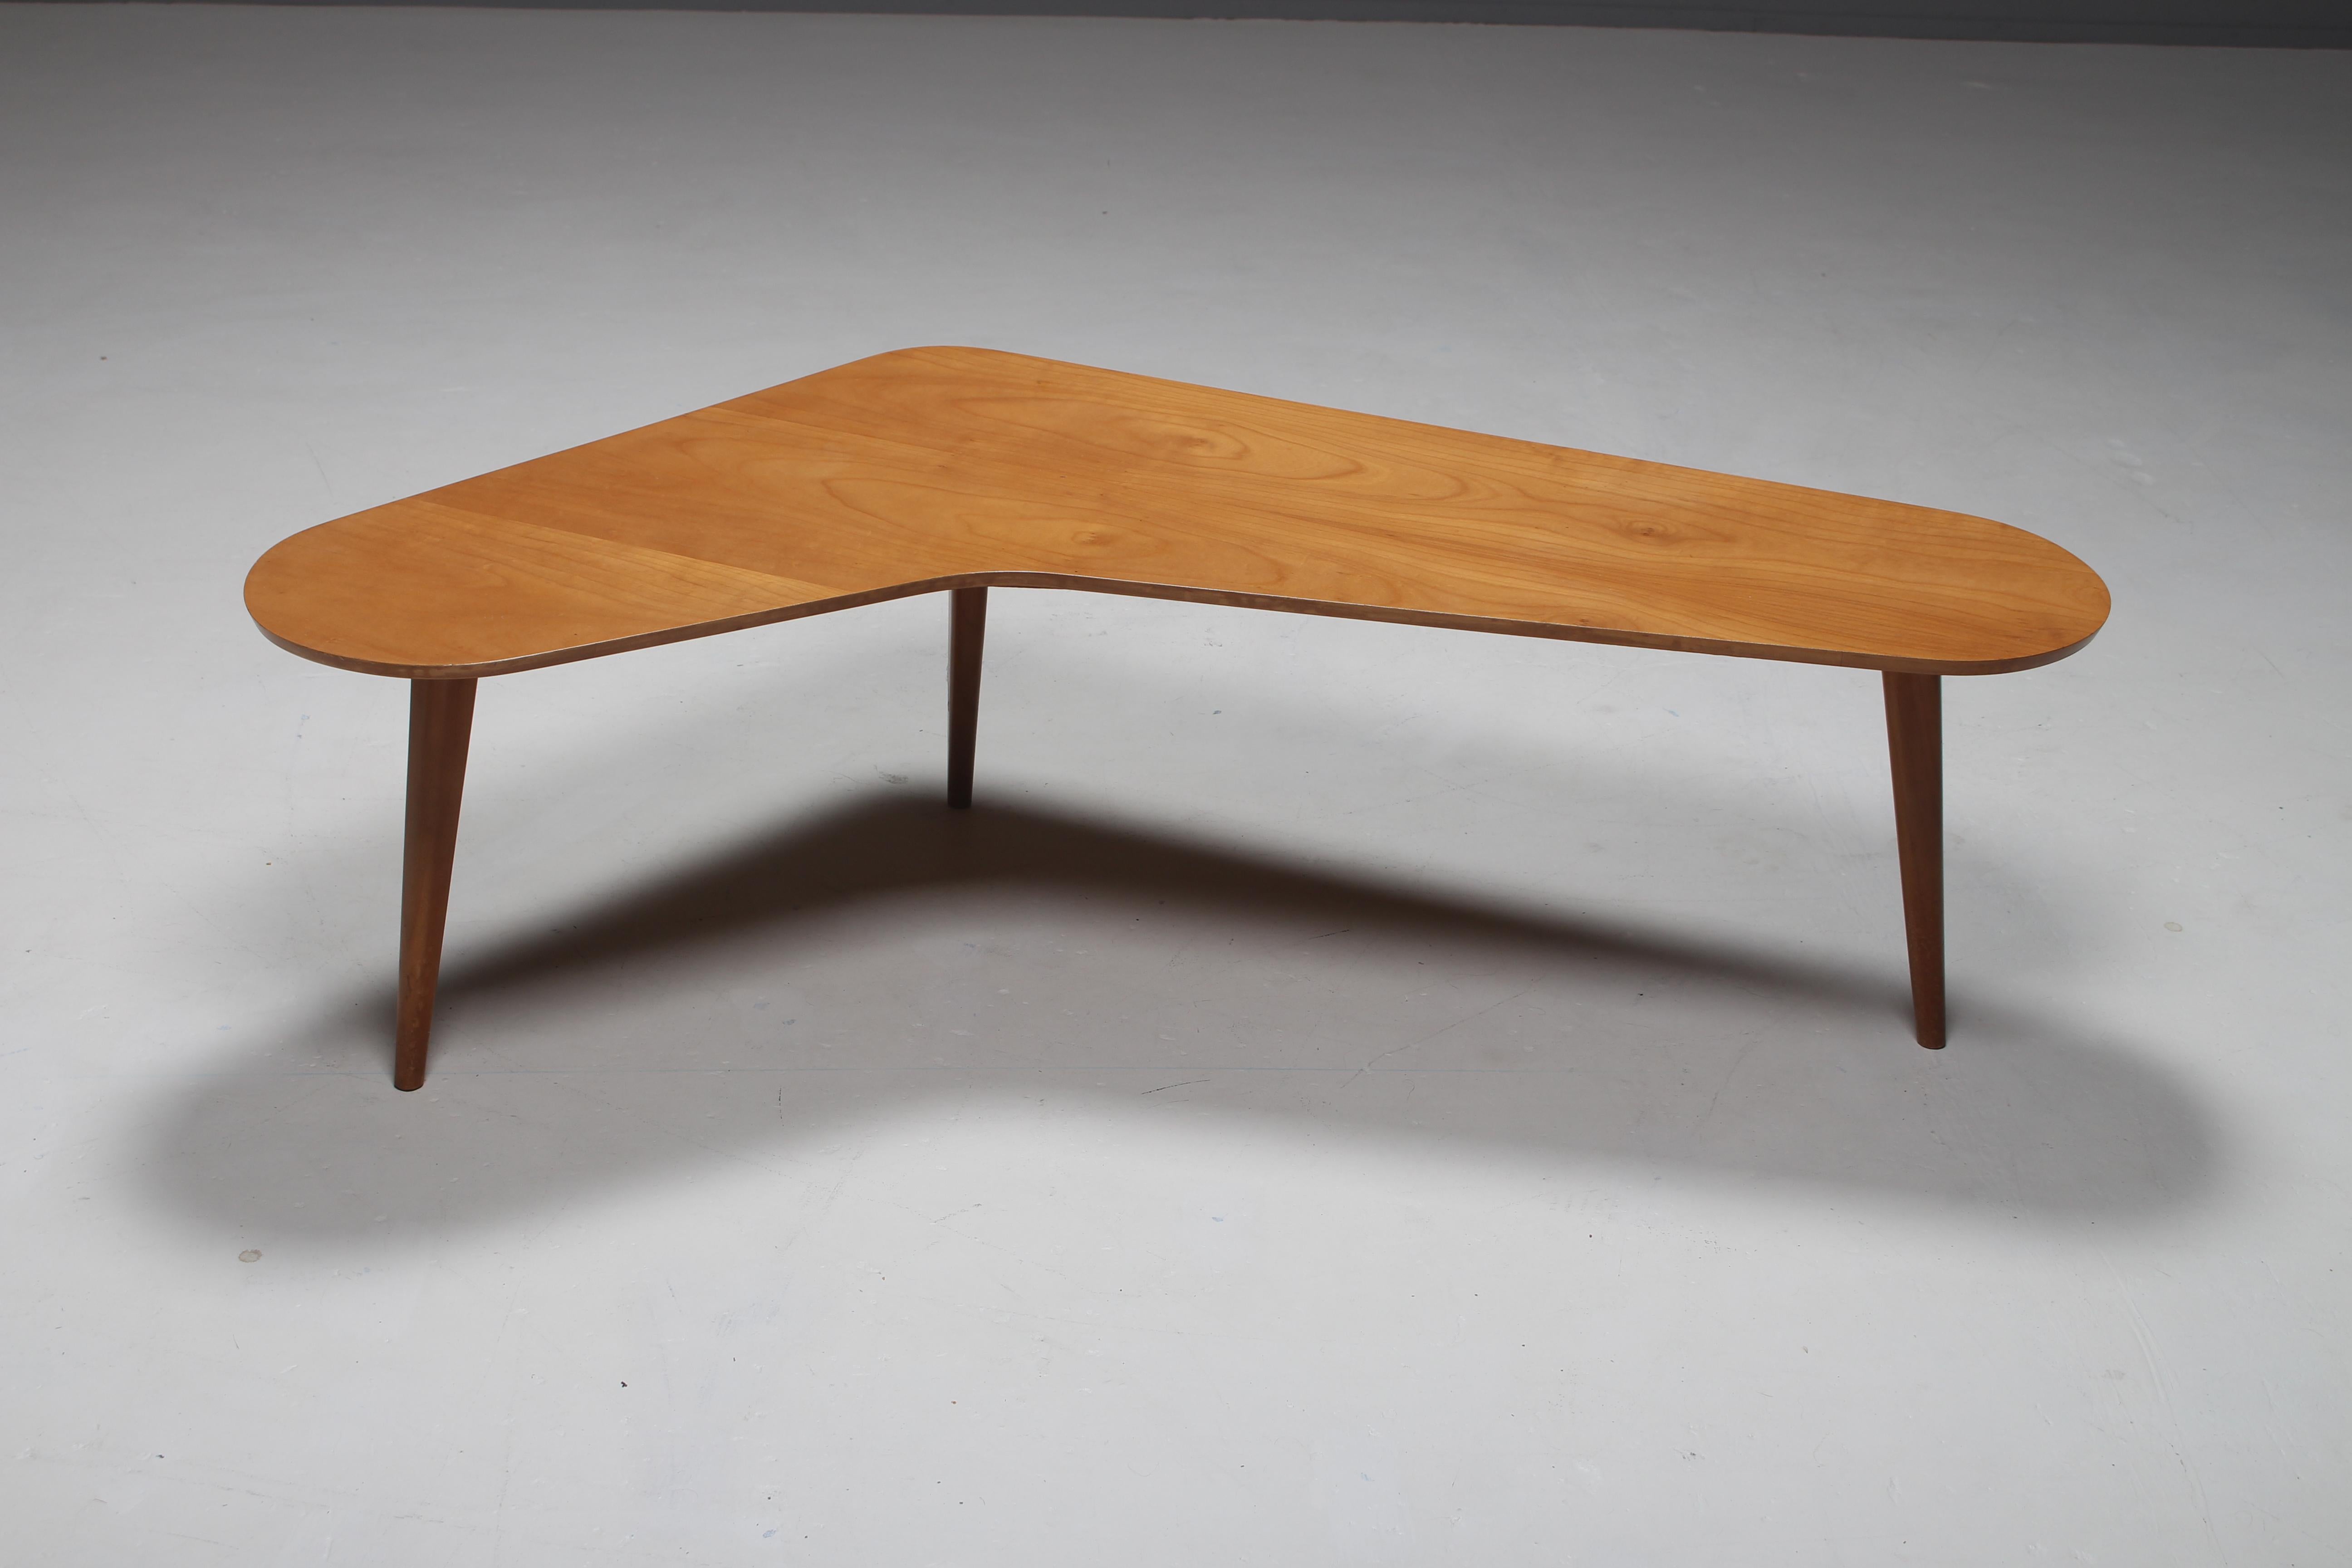 A lovely freeform boomerang coffee table produced by Bovenkamp, the Netherlands in the 1960s.
We attribute this coffee table to Danish designer Aksel Bender Madsen who designed a lot of furniture for the Dutch Bovenkamp Company in the 1960s.
The